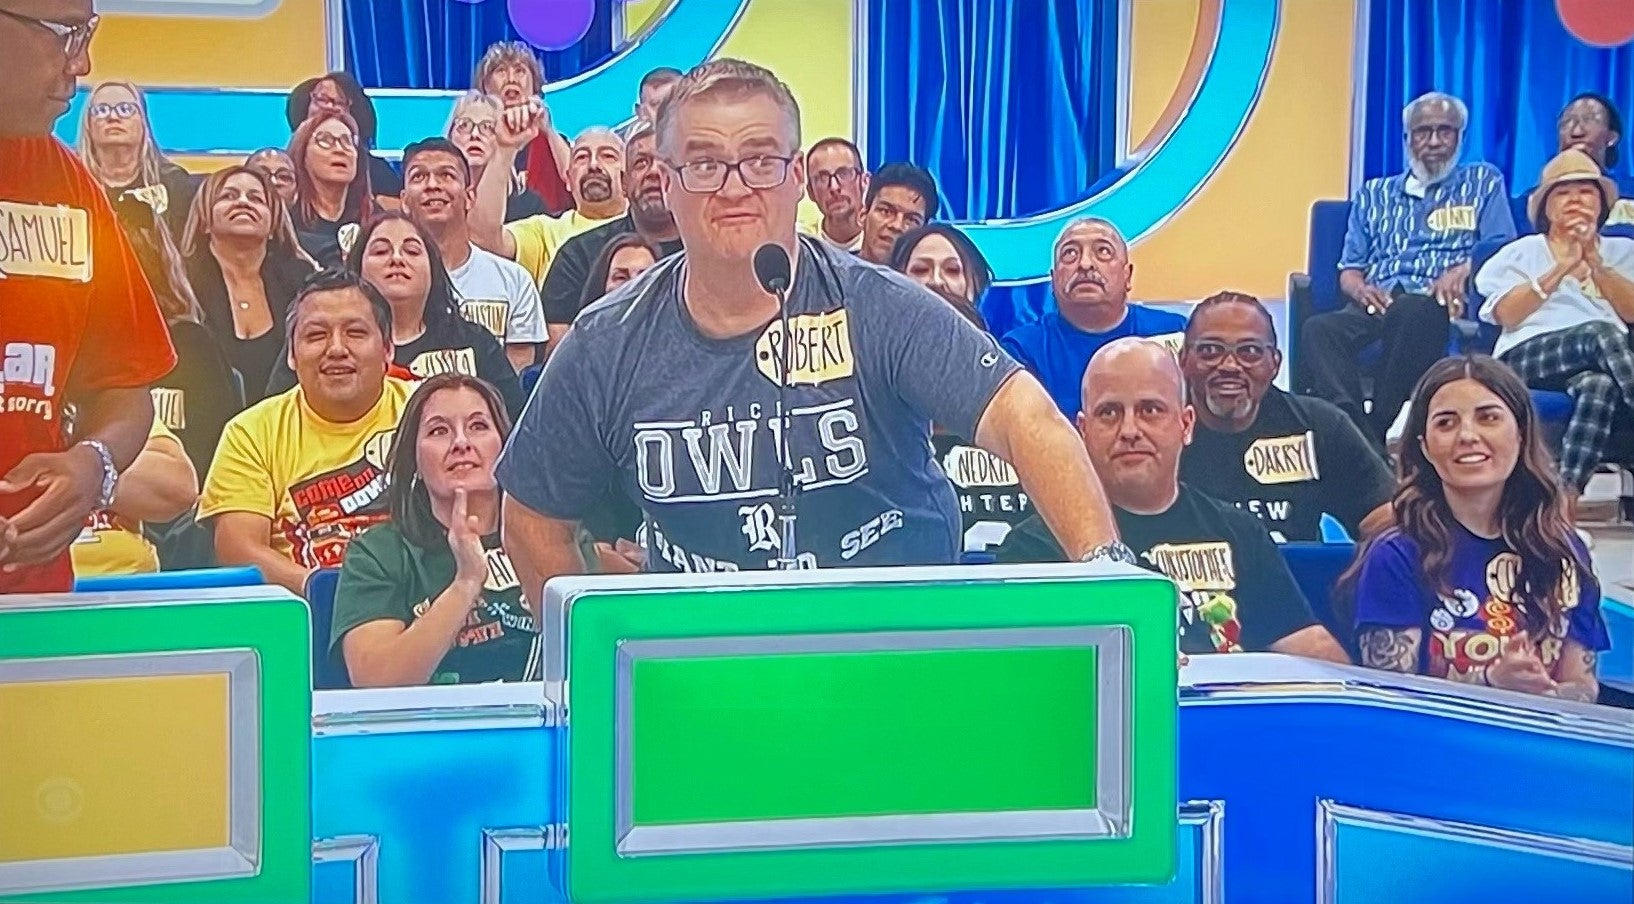 Robert Lundin appeared on The Price is Right on October 20.